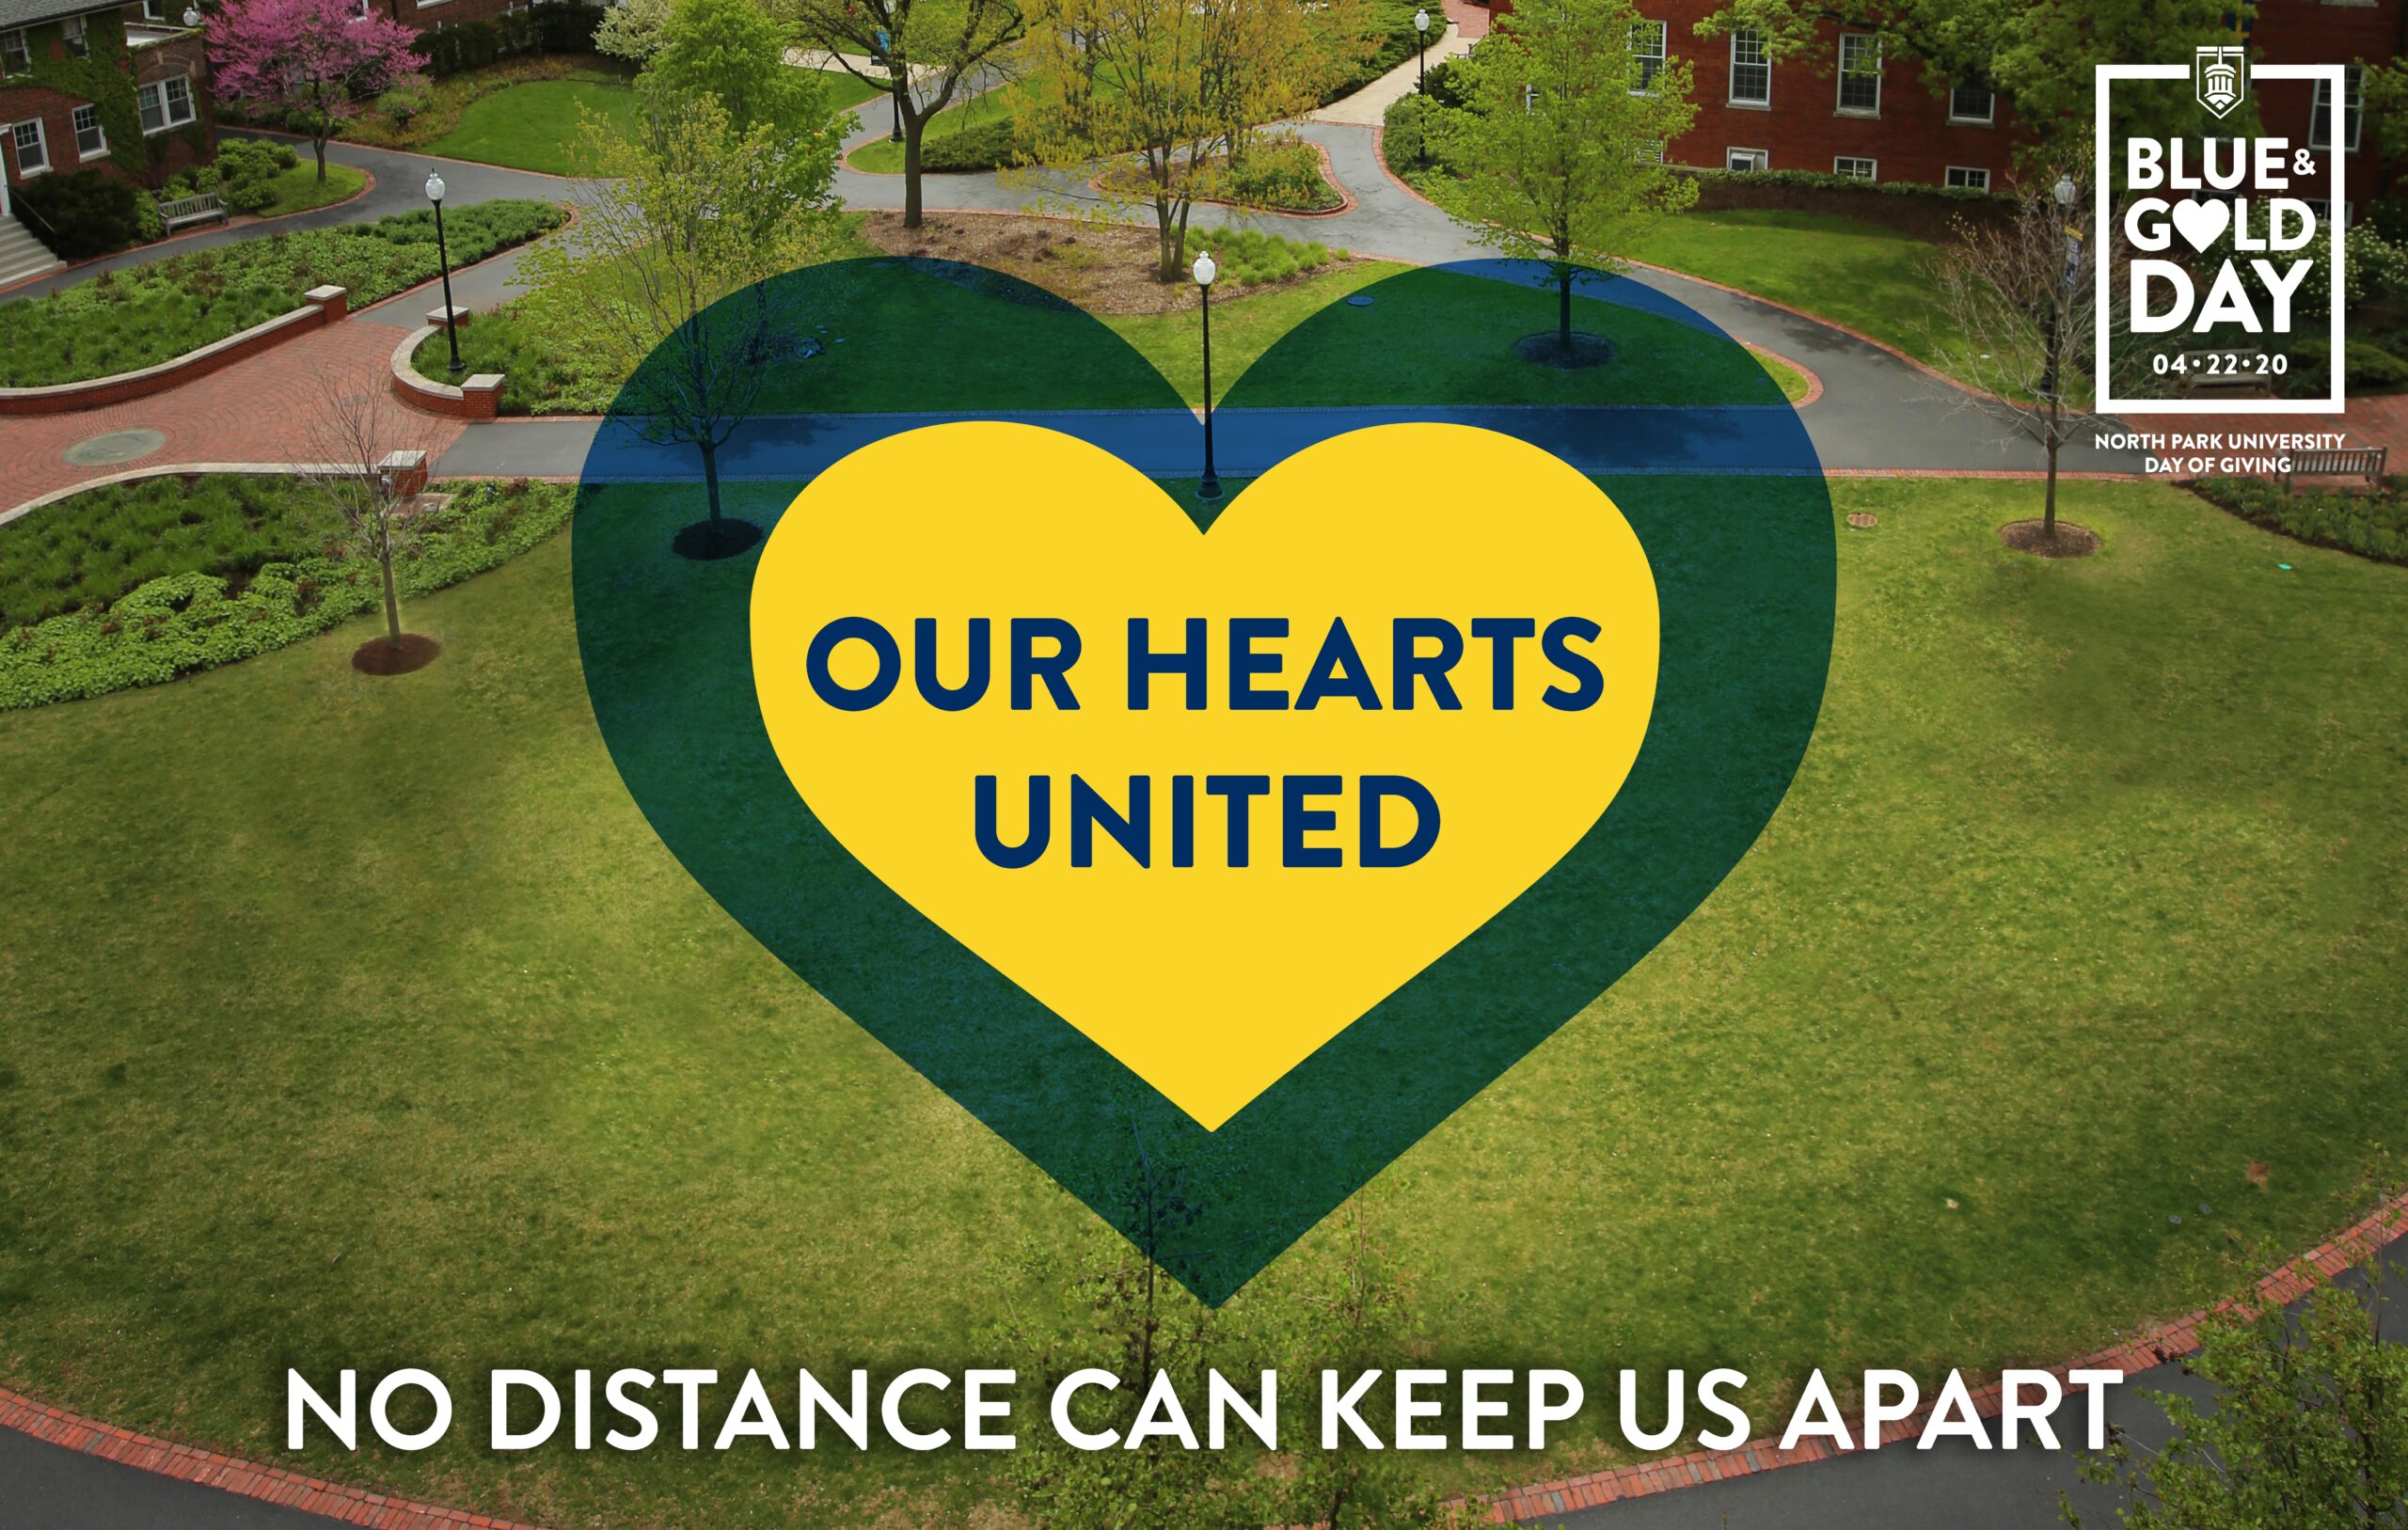 Our Hearts United: No distance can keep us apart.